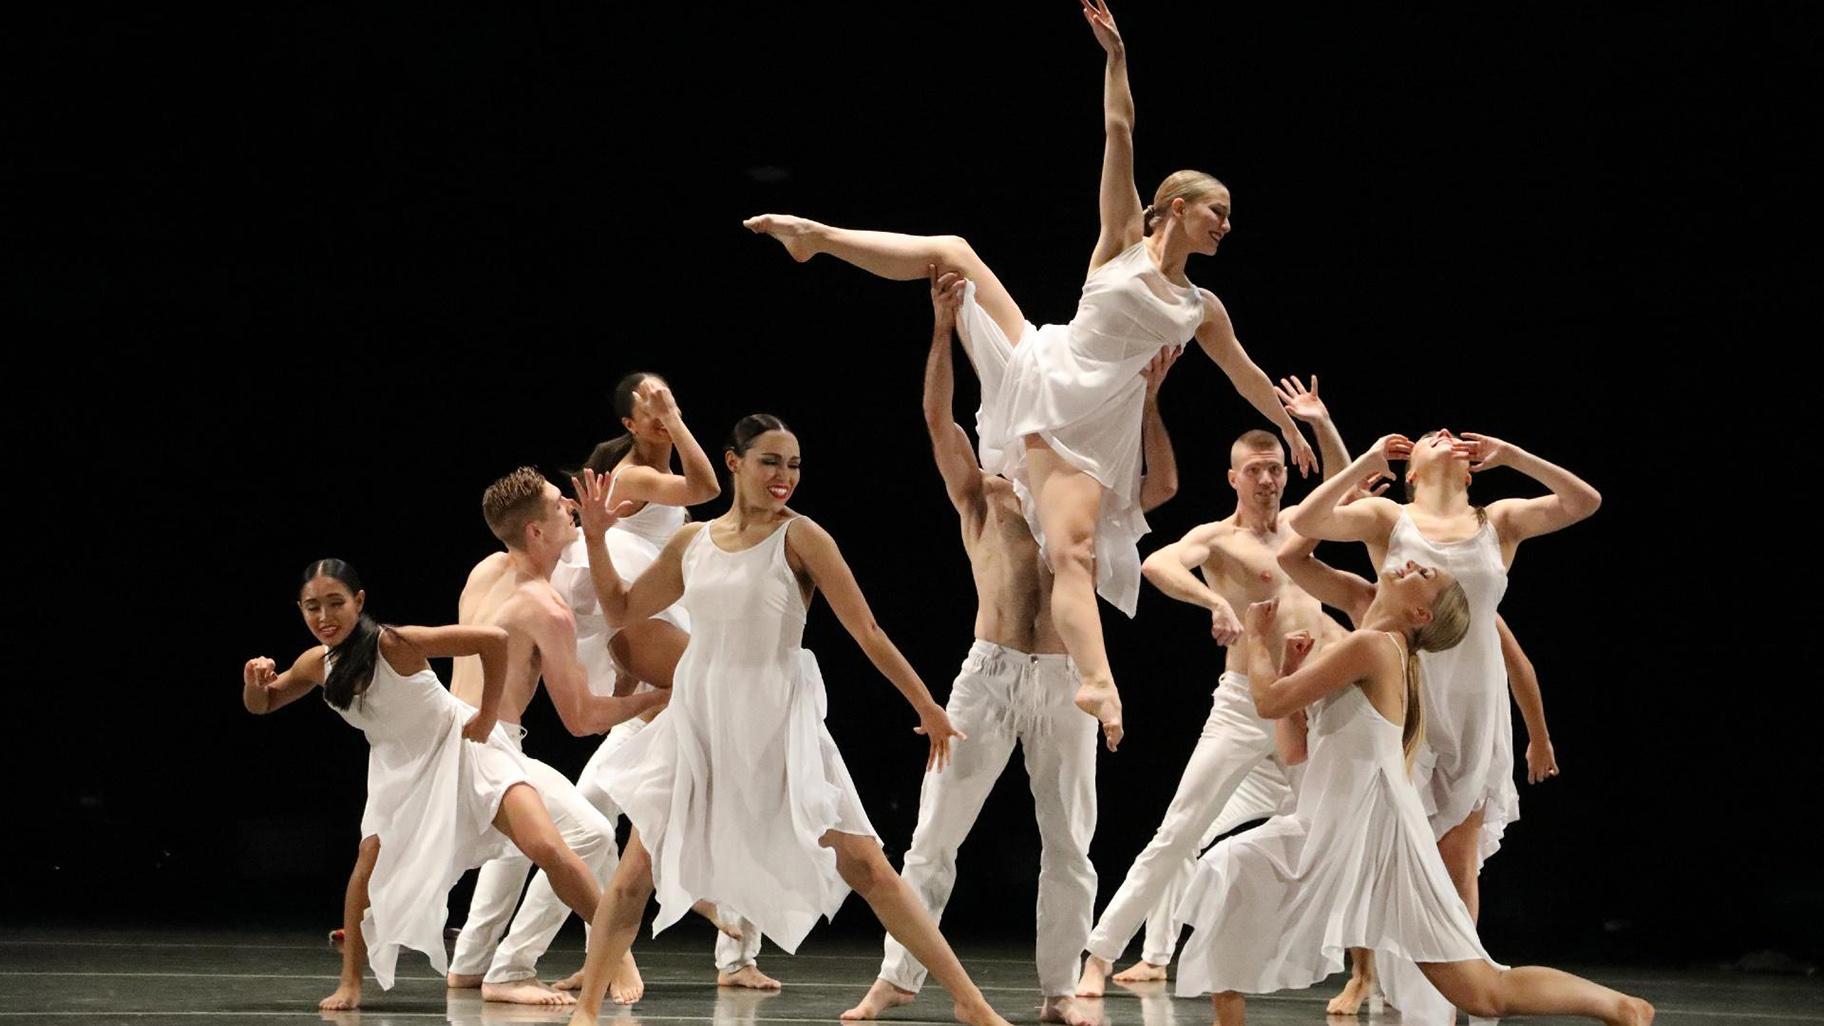 Giordano Dance Chicago performs. (Credit: Gorman Cook)